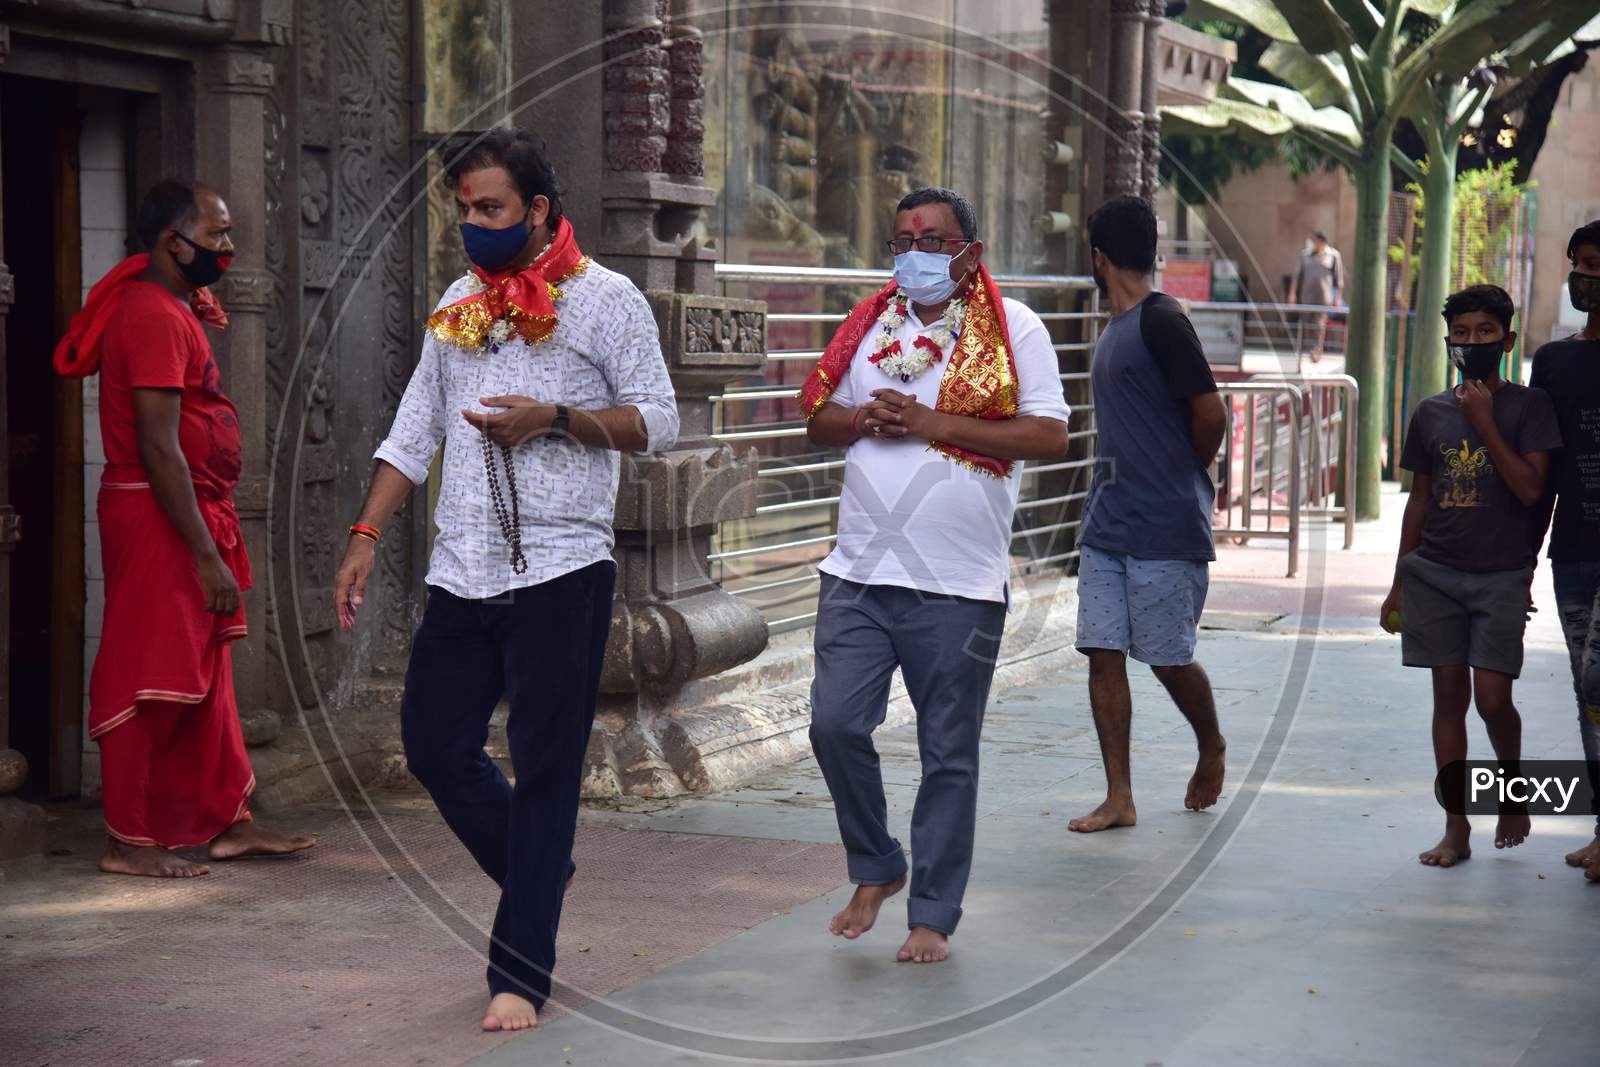 Indian devotees arrived Kamakhya temple after re-opens for public after a gap of nearly six months due to coronavirus lockdown with certain restrictions, in Guwahati, India on October 11, 2020